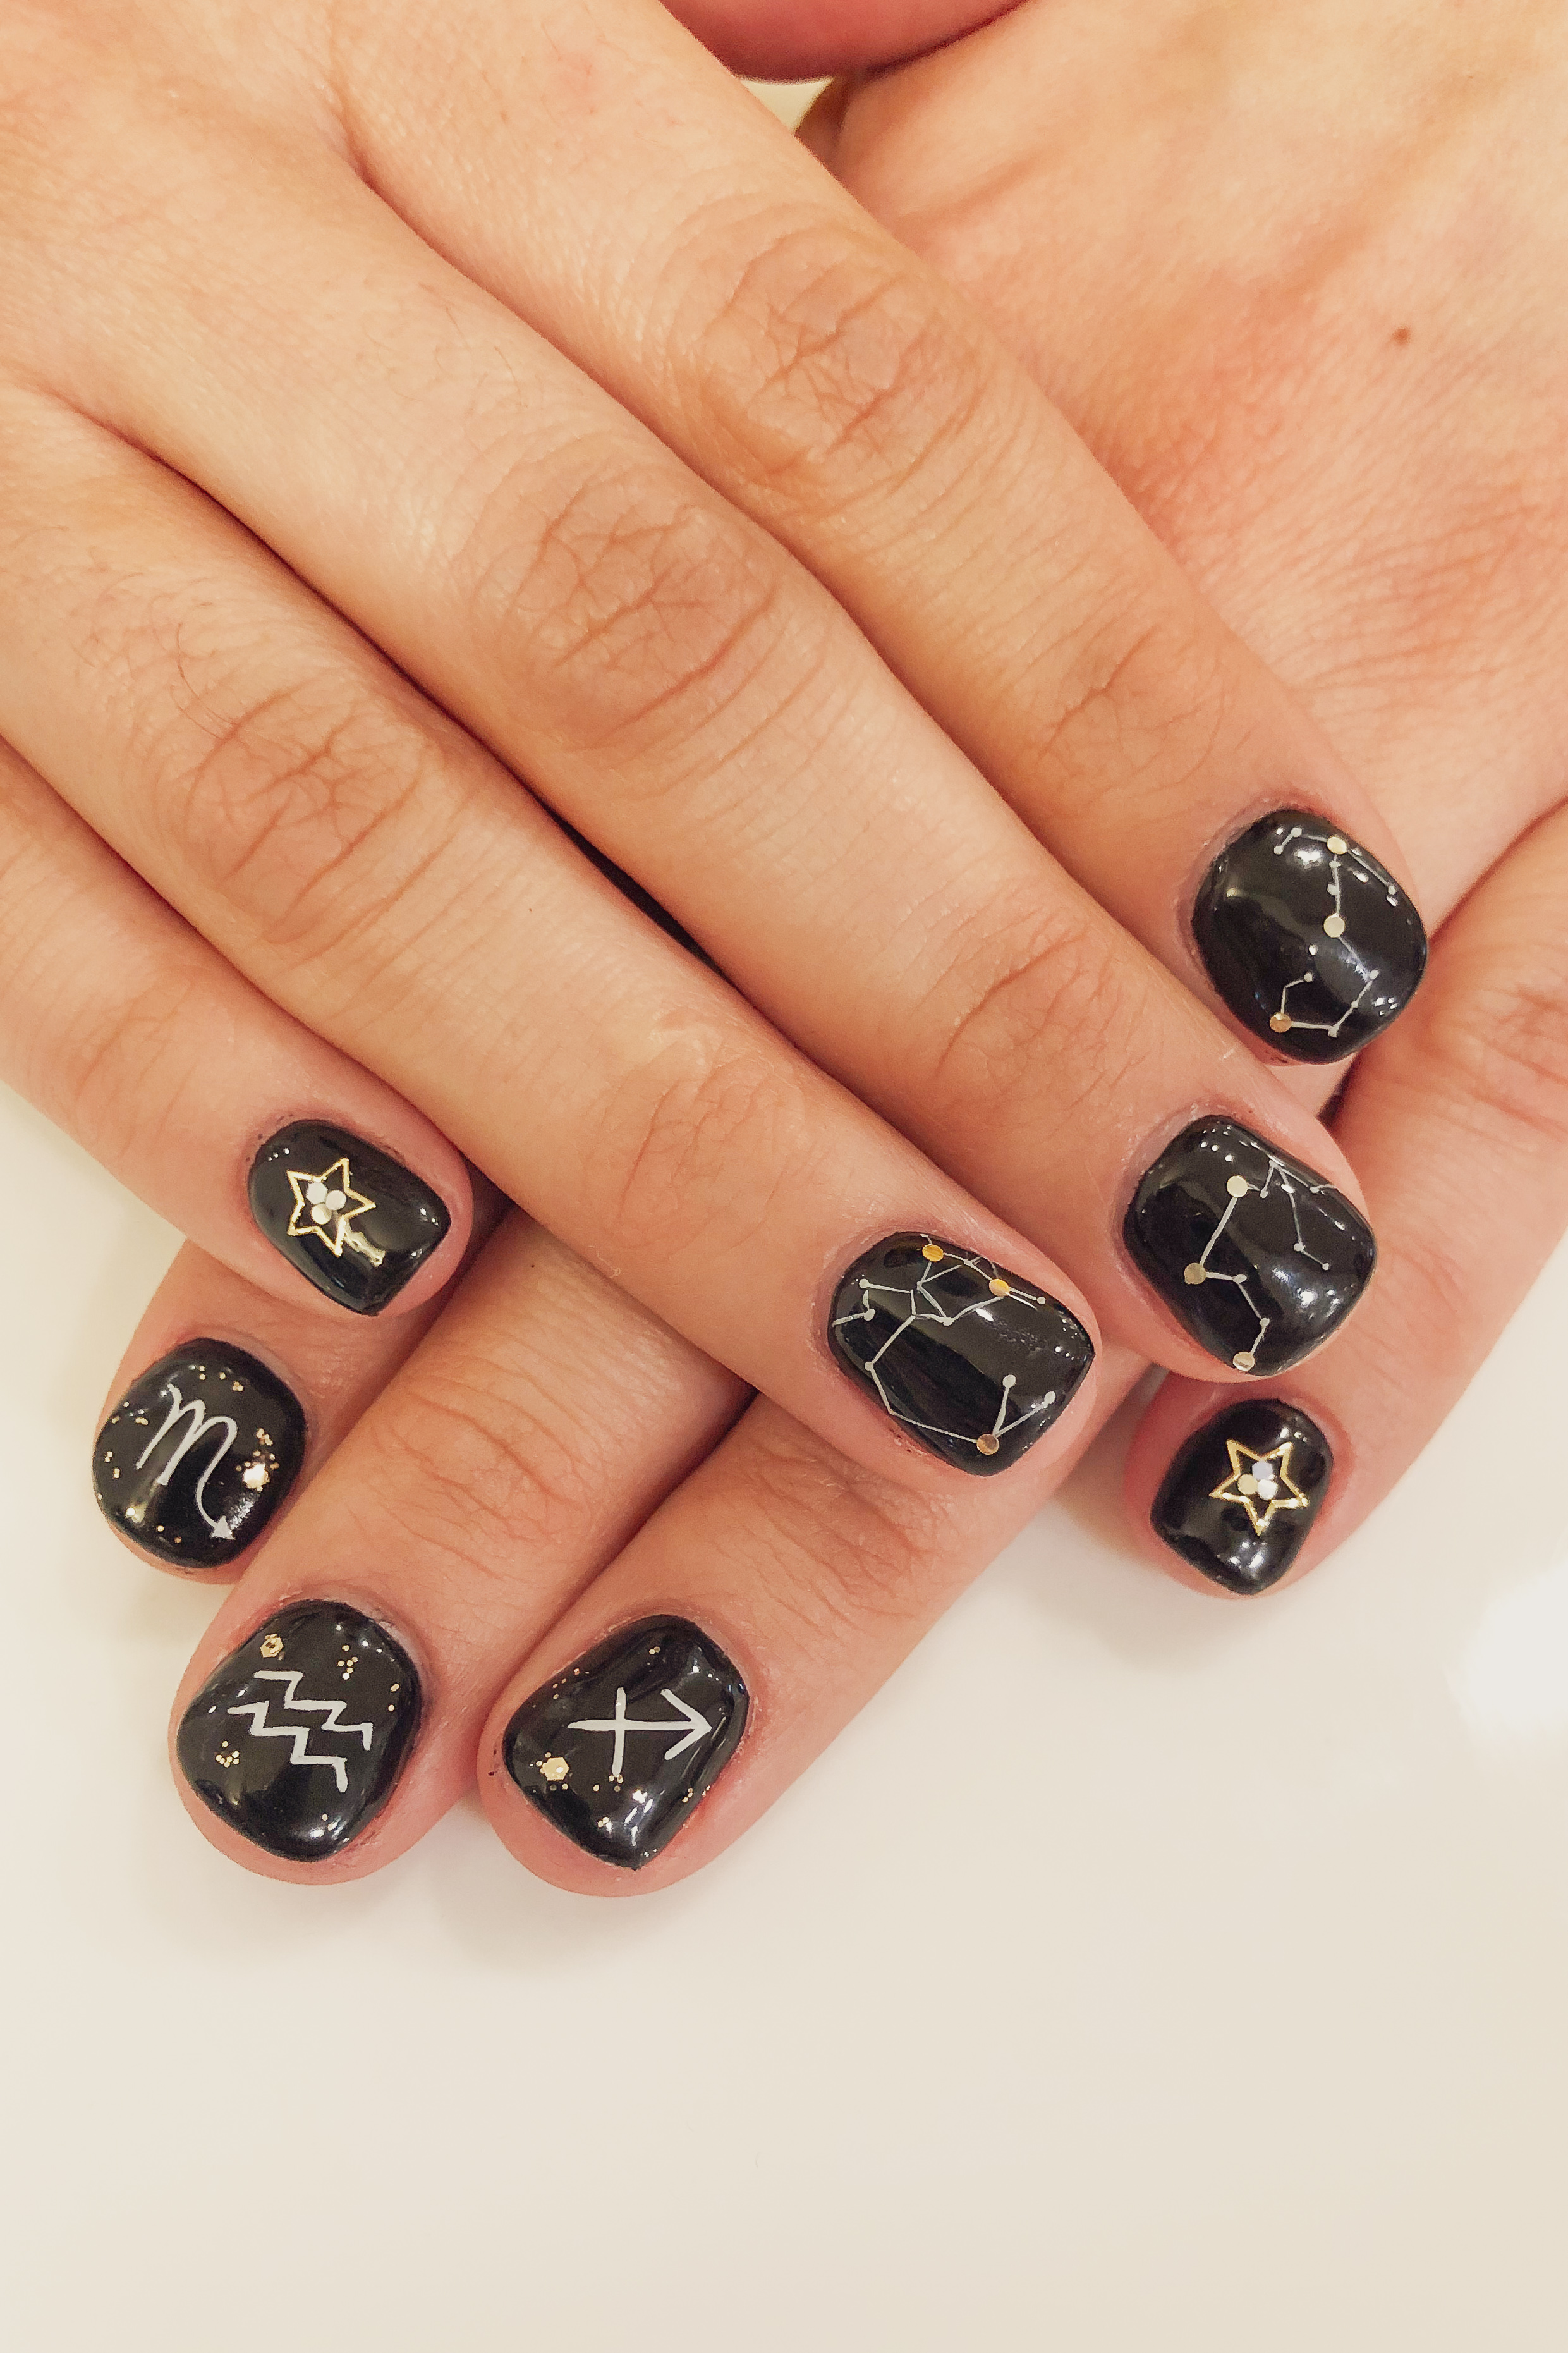 20 Black-Tip Nail Ideas for a Moody Manicure